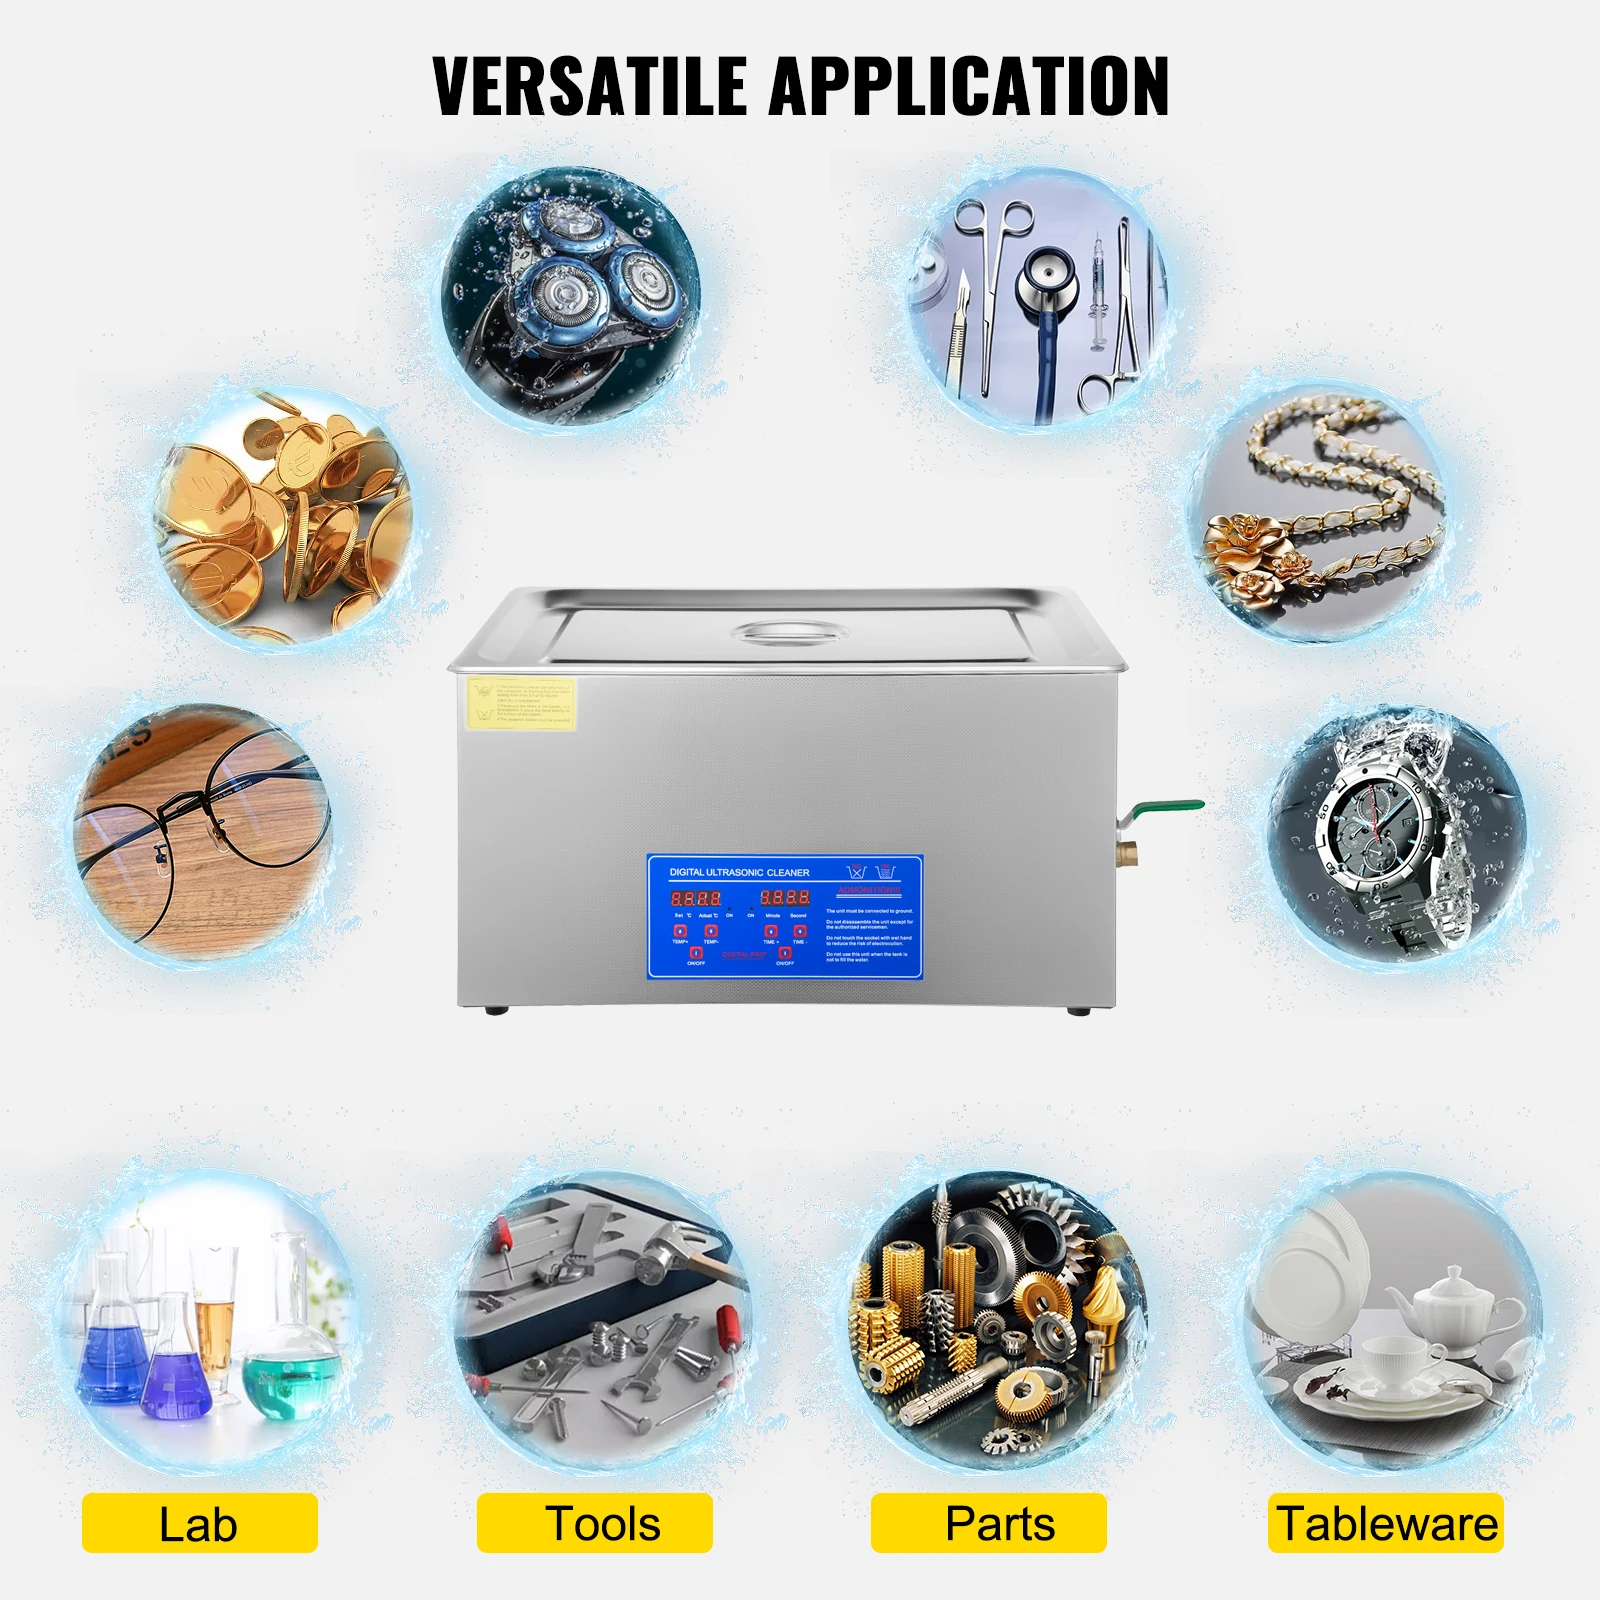 ultrasonic cleaner, 26-30L, jewelry cleaner